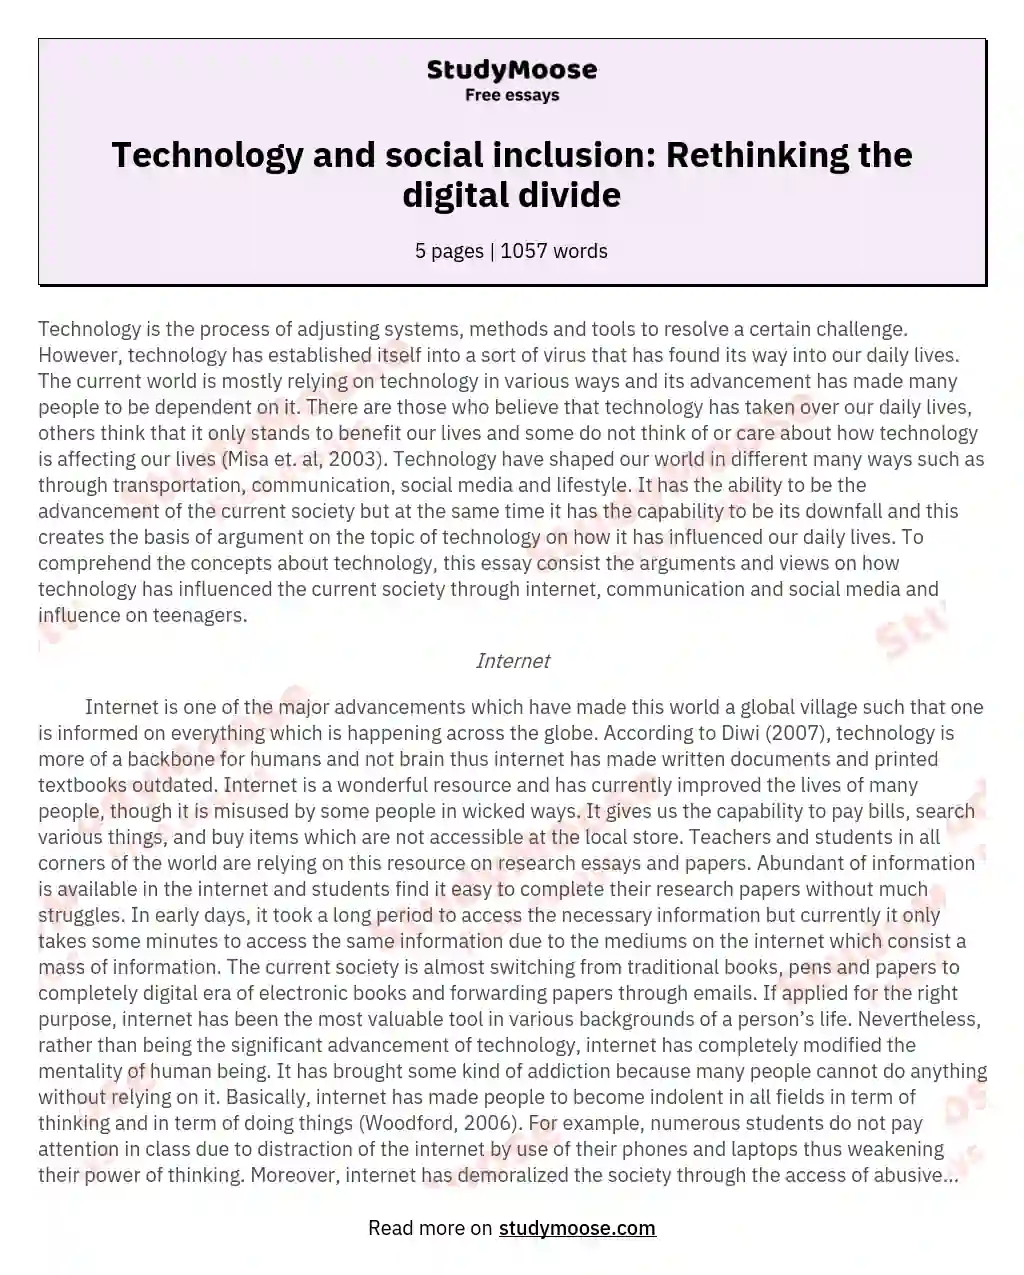 Technology and social inclusion: Rethinking the digital divide